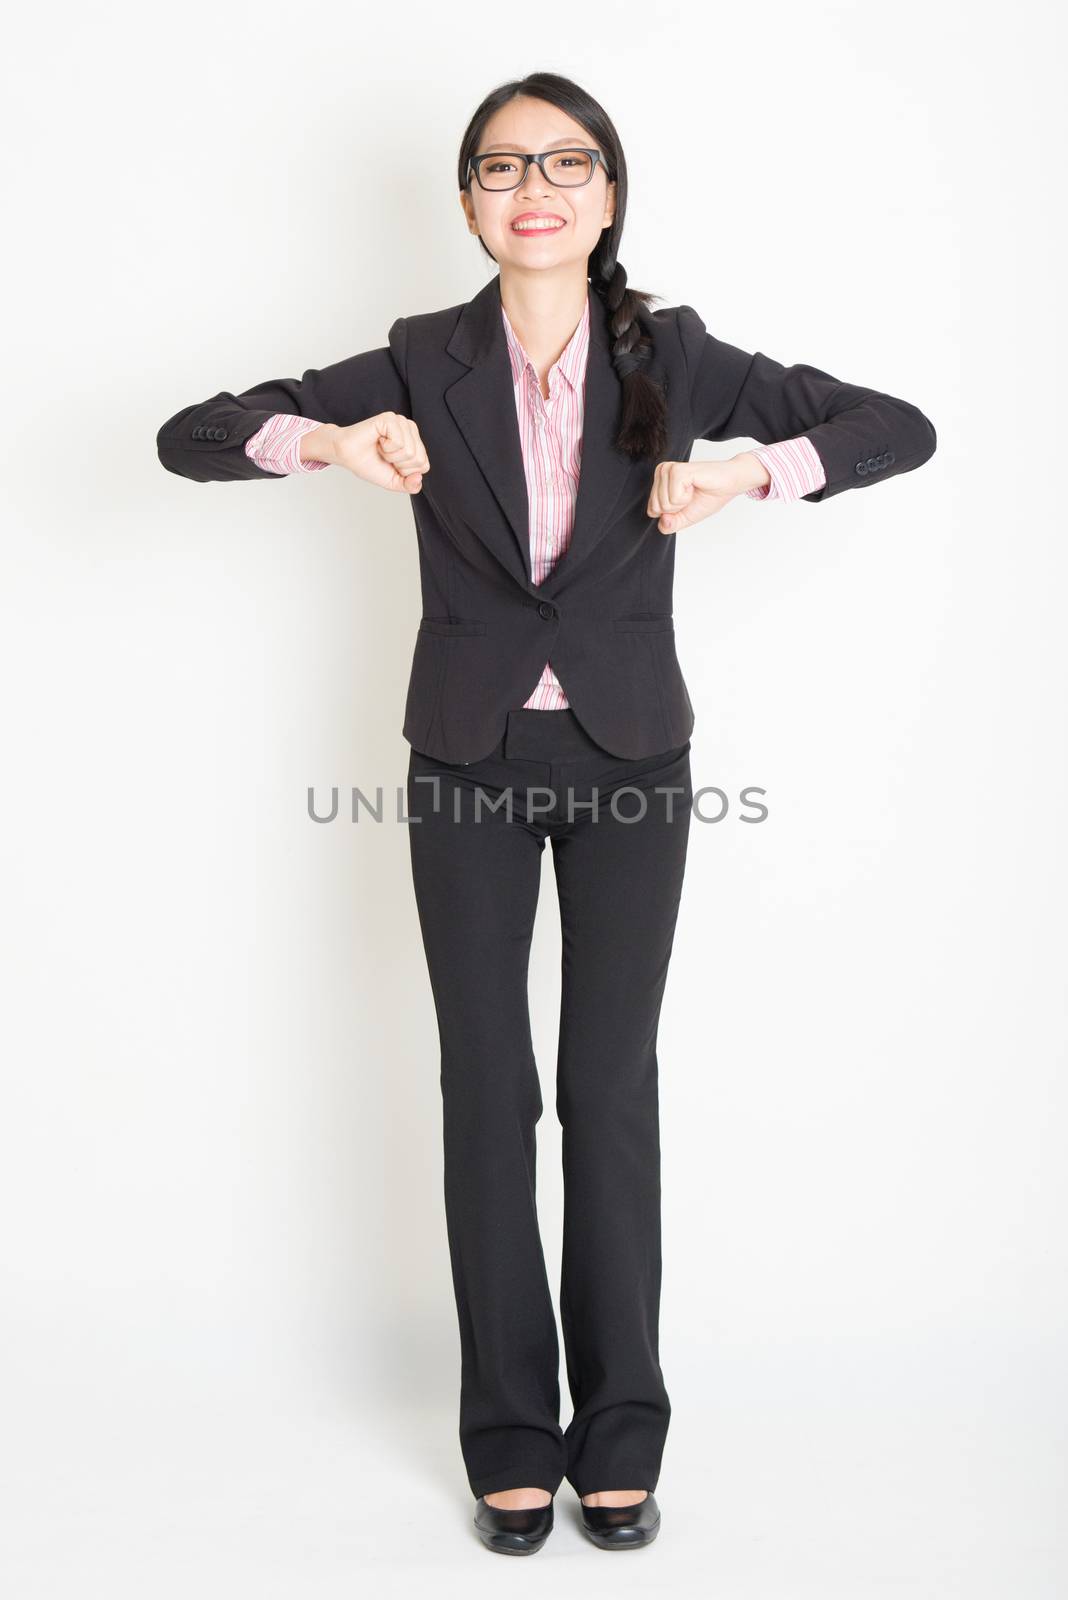 Full length front view of young Asian businesswoman in formalwear ready to jump, standing on plain background.